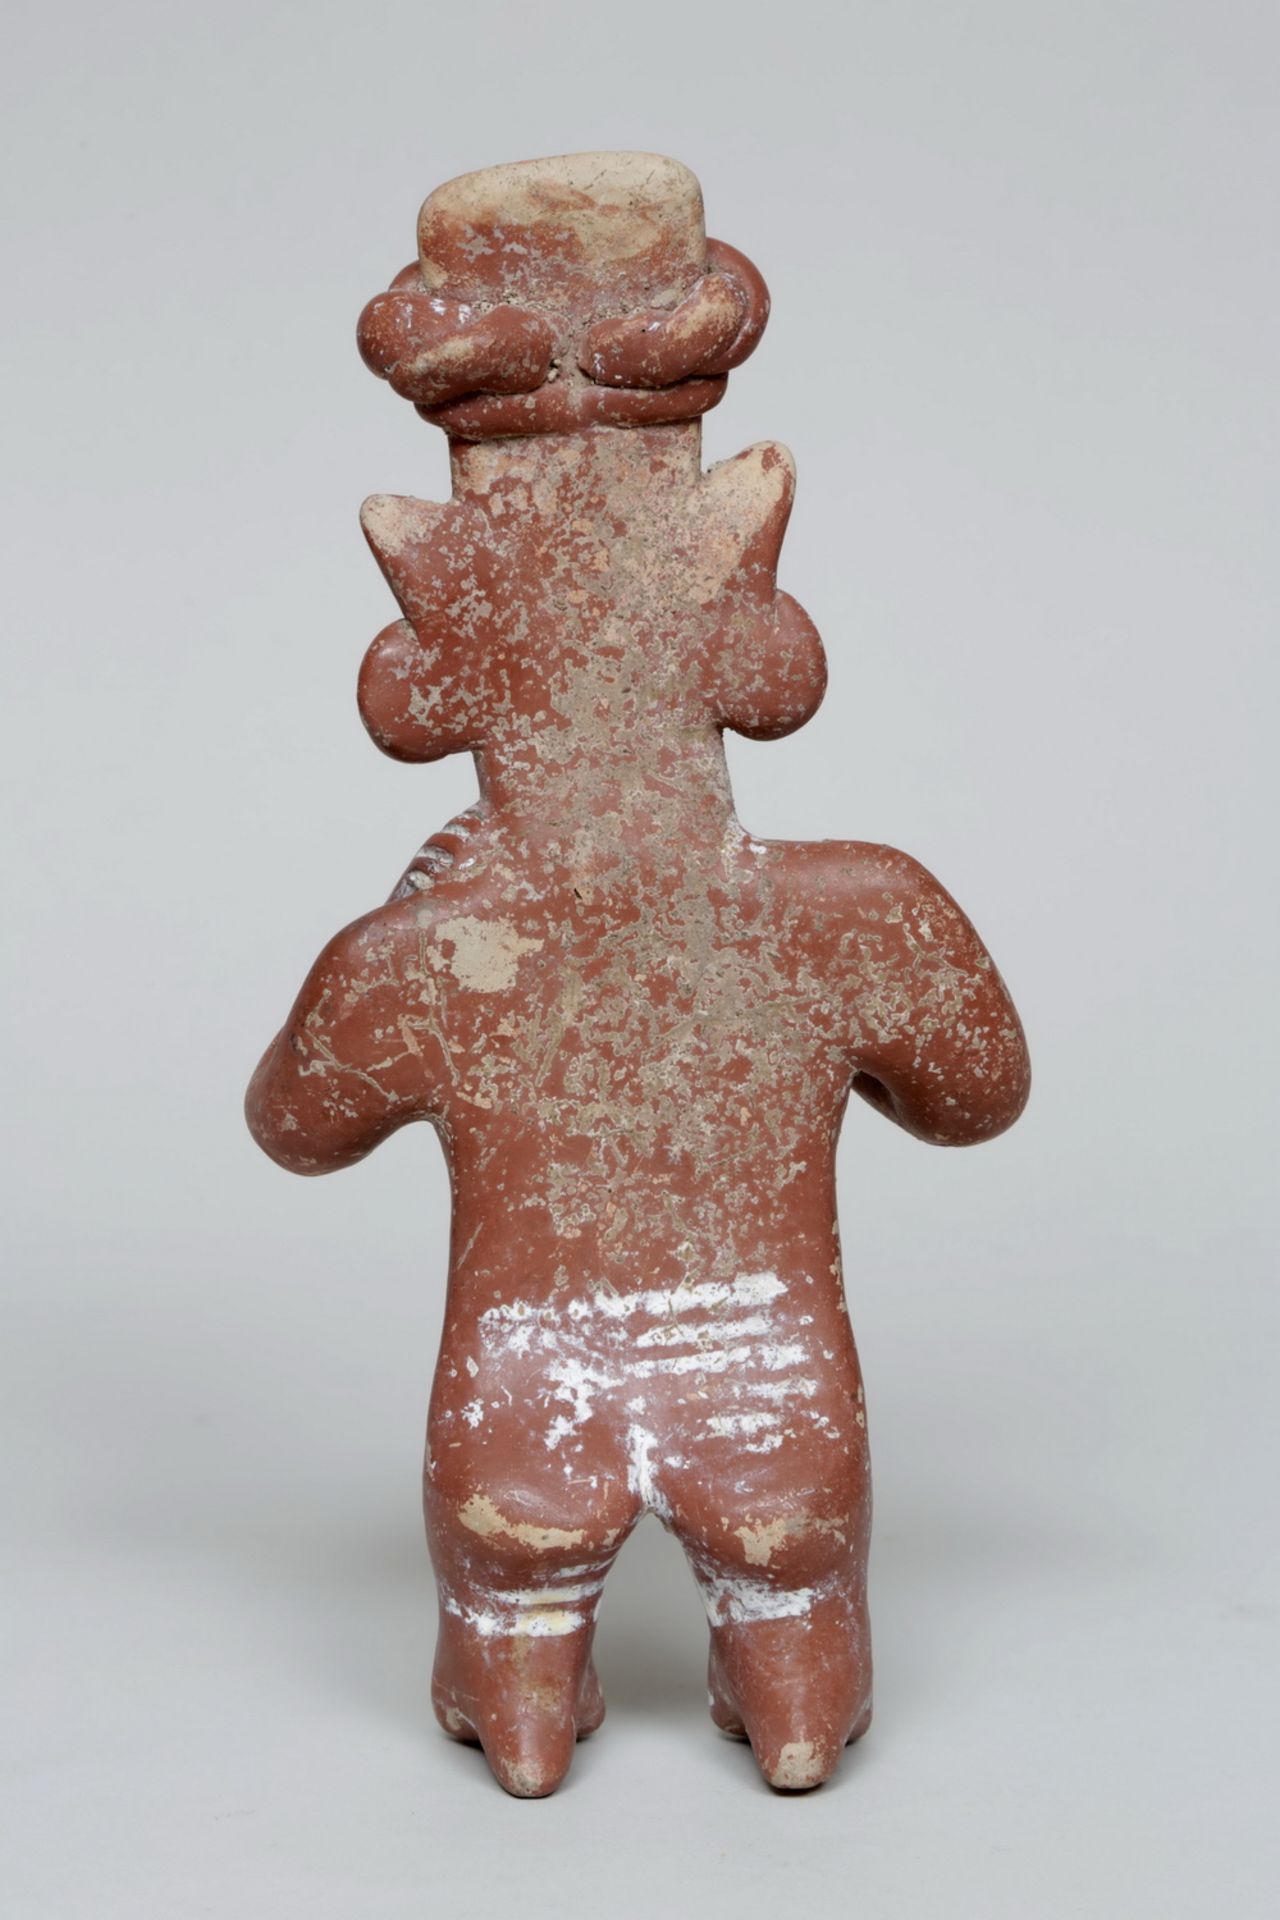 West Mexico, Jalisco, 3rd BC - 1st AD, standing female figure. - Image 4 of 4